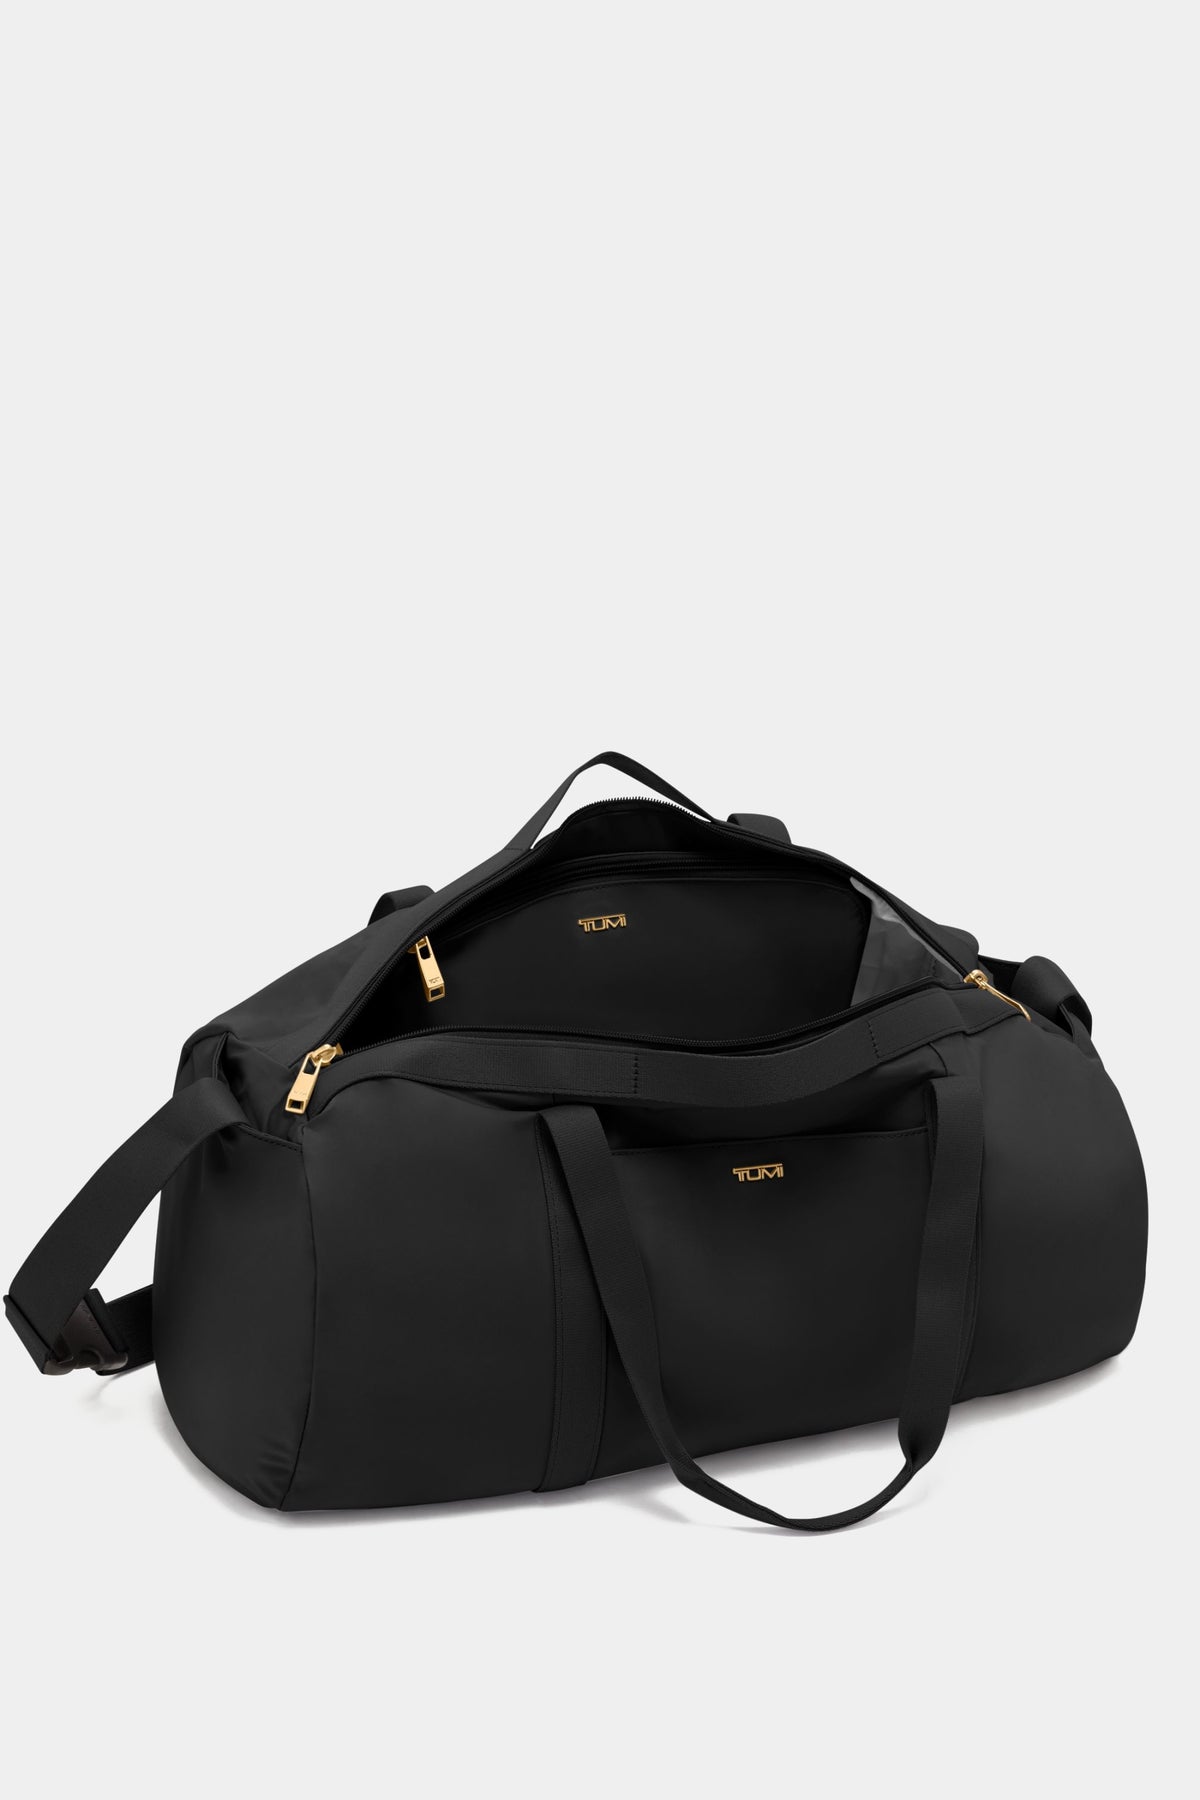 Hotel Collection Duffel Bag in Black | One | Lord & Taylor